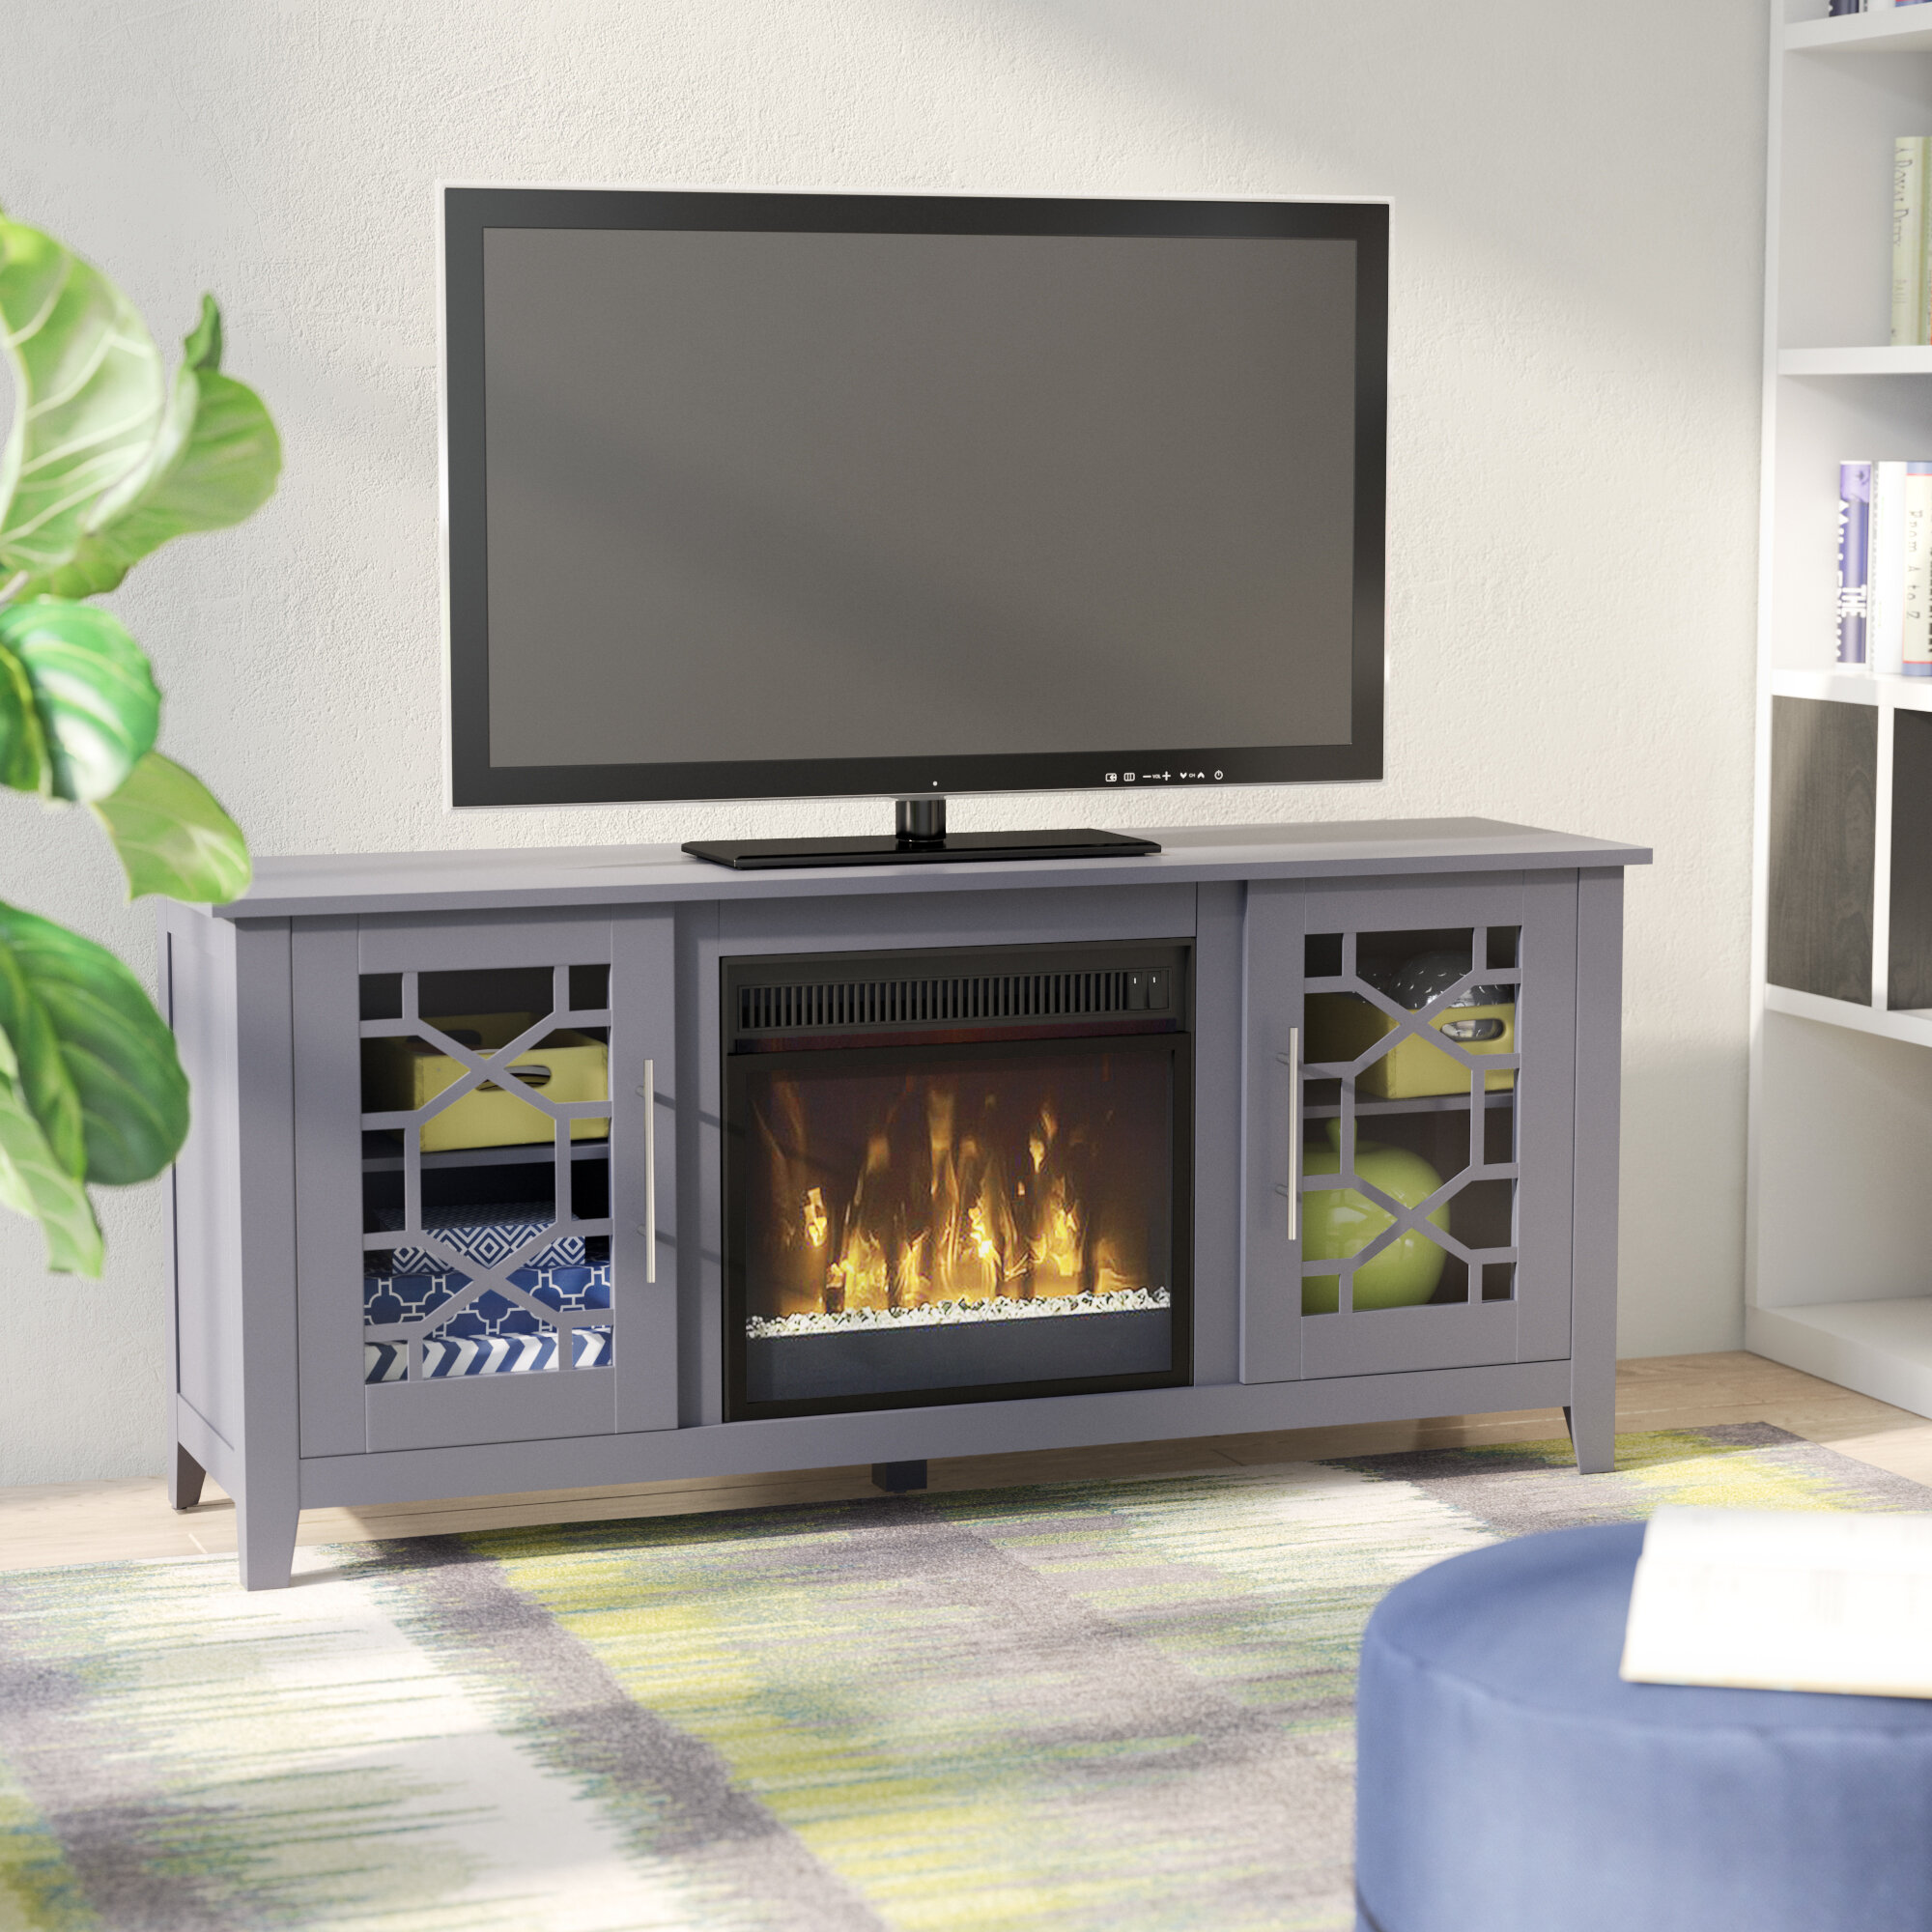 Solid Wood Entertainment Center with Fireplace Awesome Media Fireplace with Remote